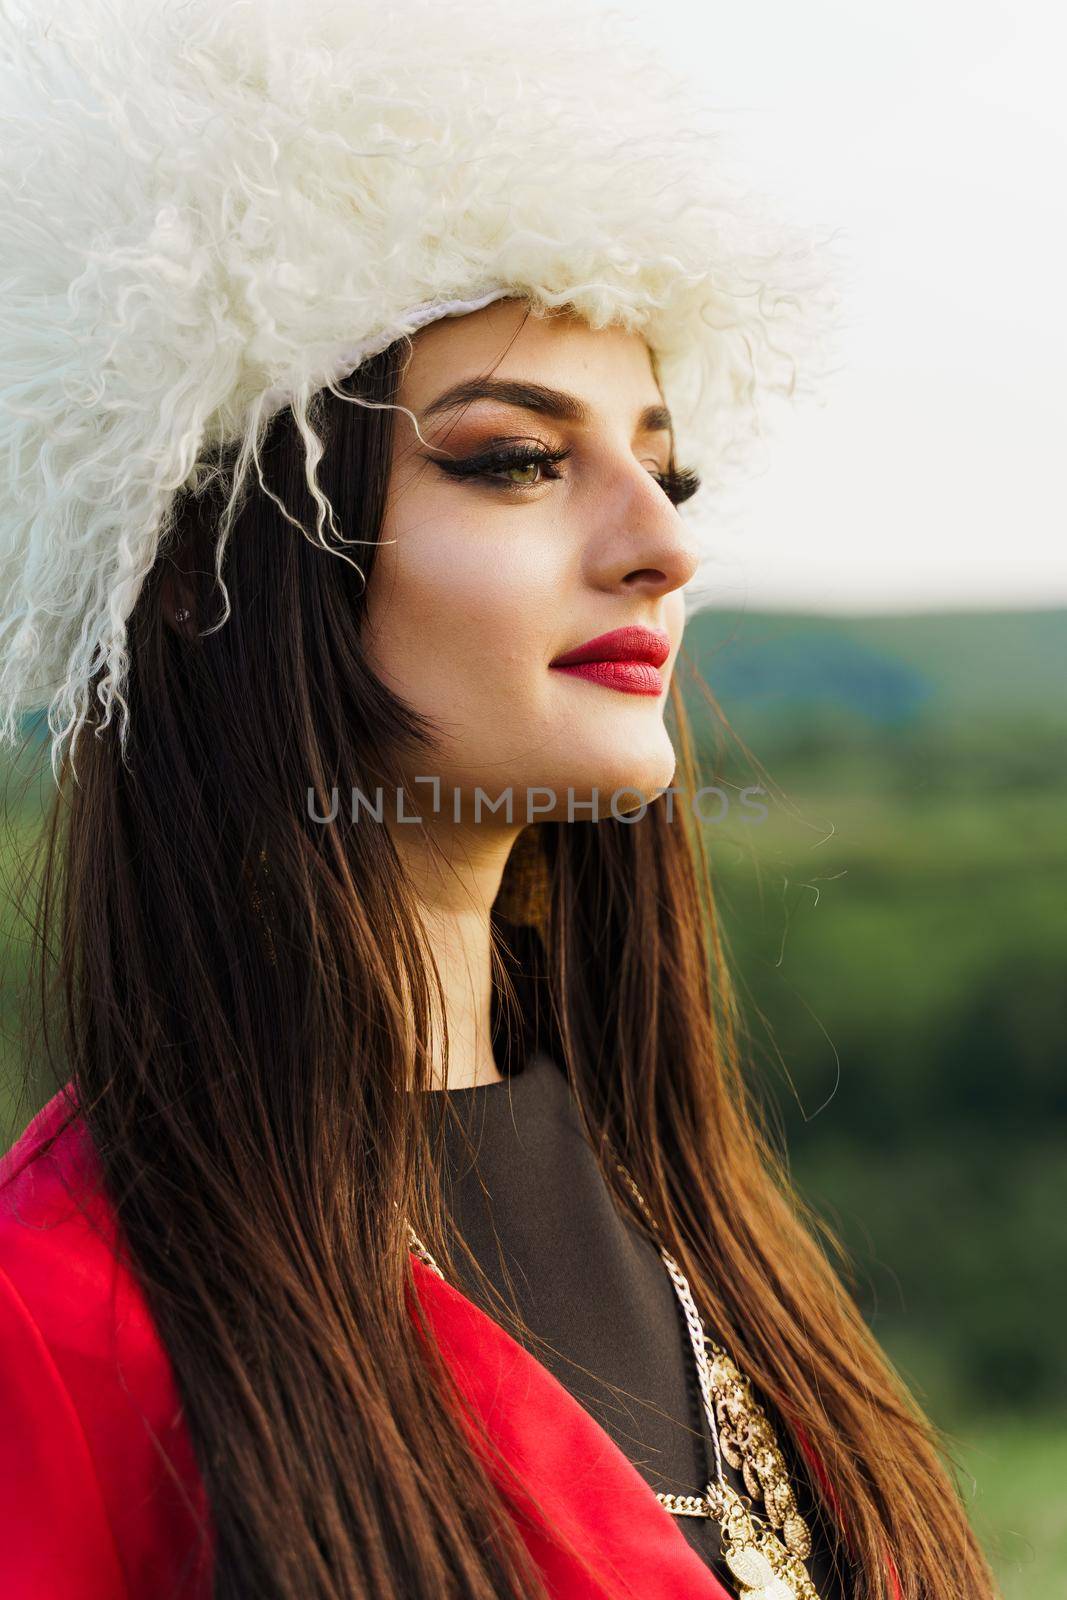 Georgian girl in papakha and red national dress with cross symbols. Attractive woman on the lake. Georgian culture lifestyle. Woman looks right side. by Rabizo